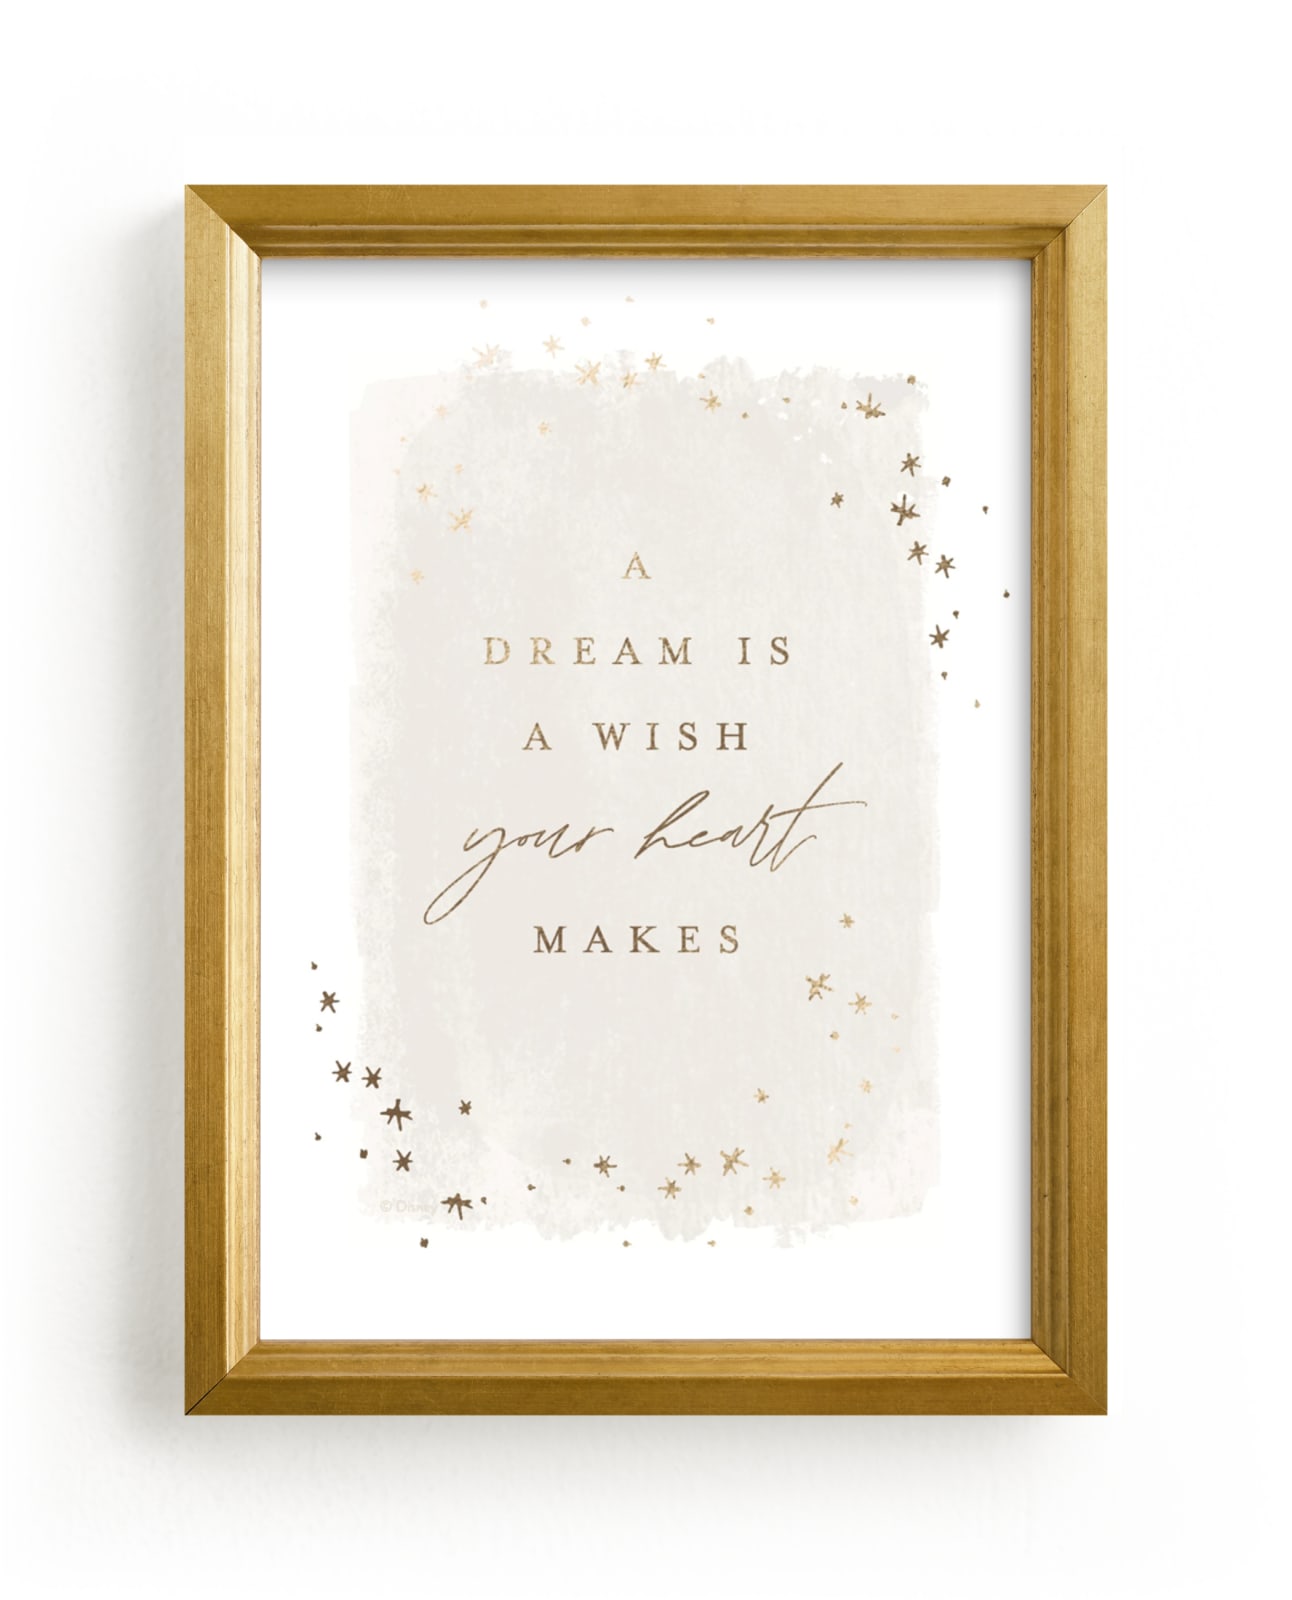 This is a white foil stamped wall art by AK Graphics called Disney A Dream.